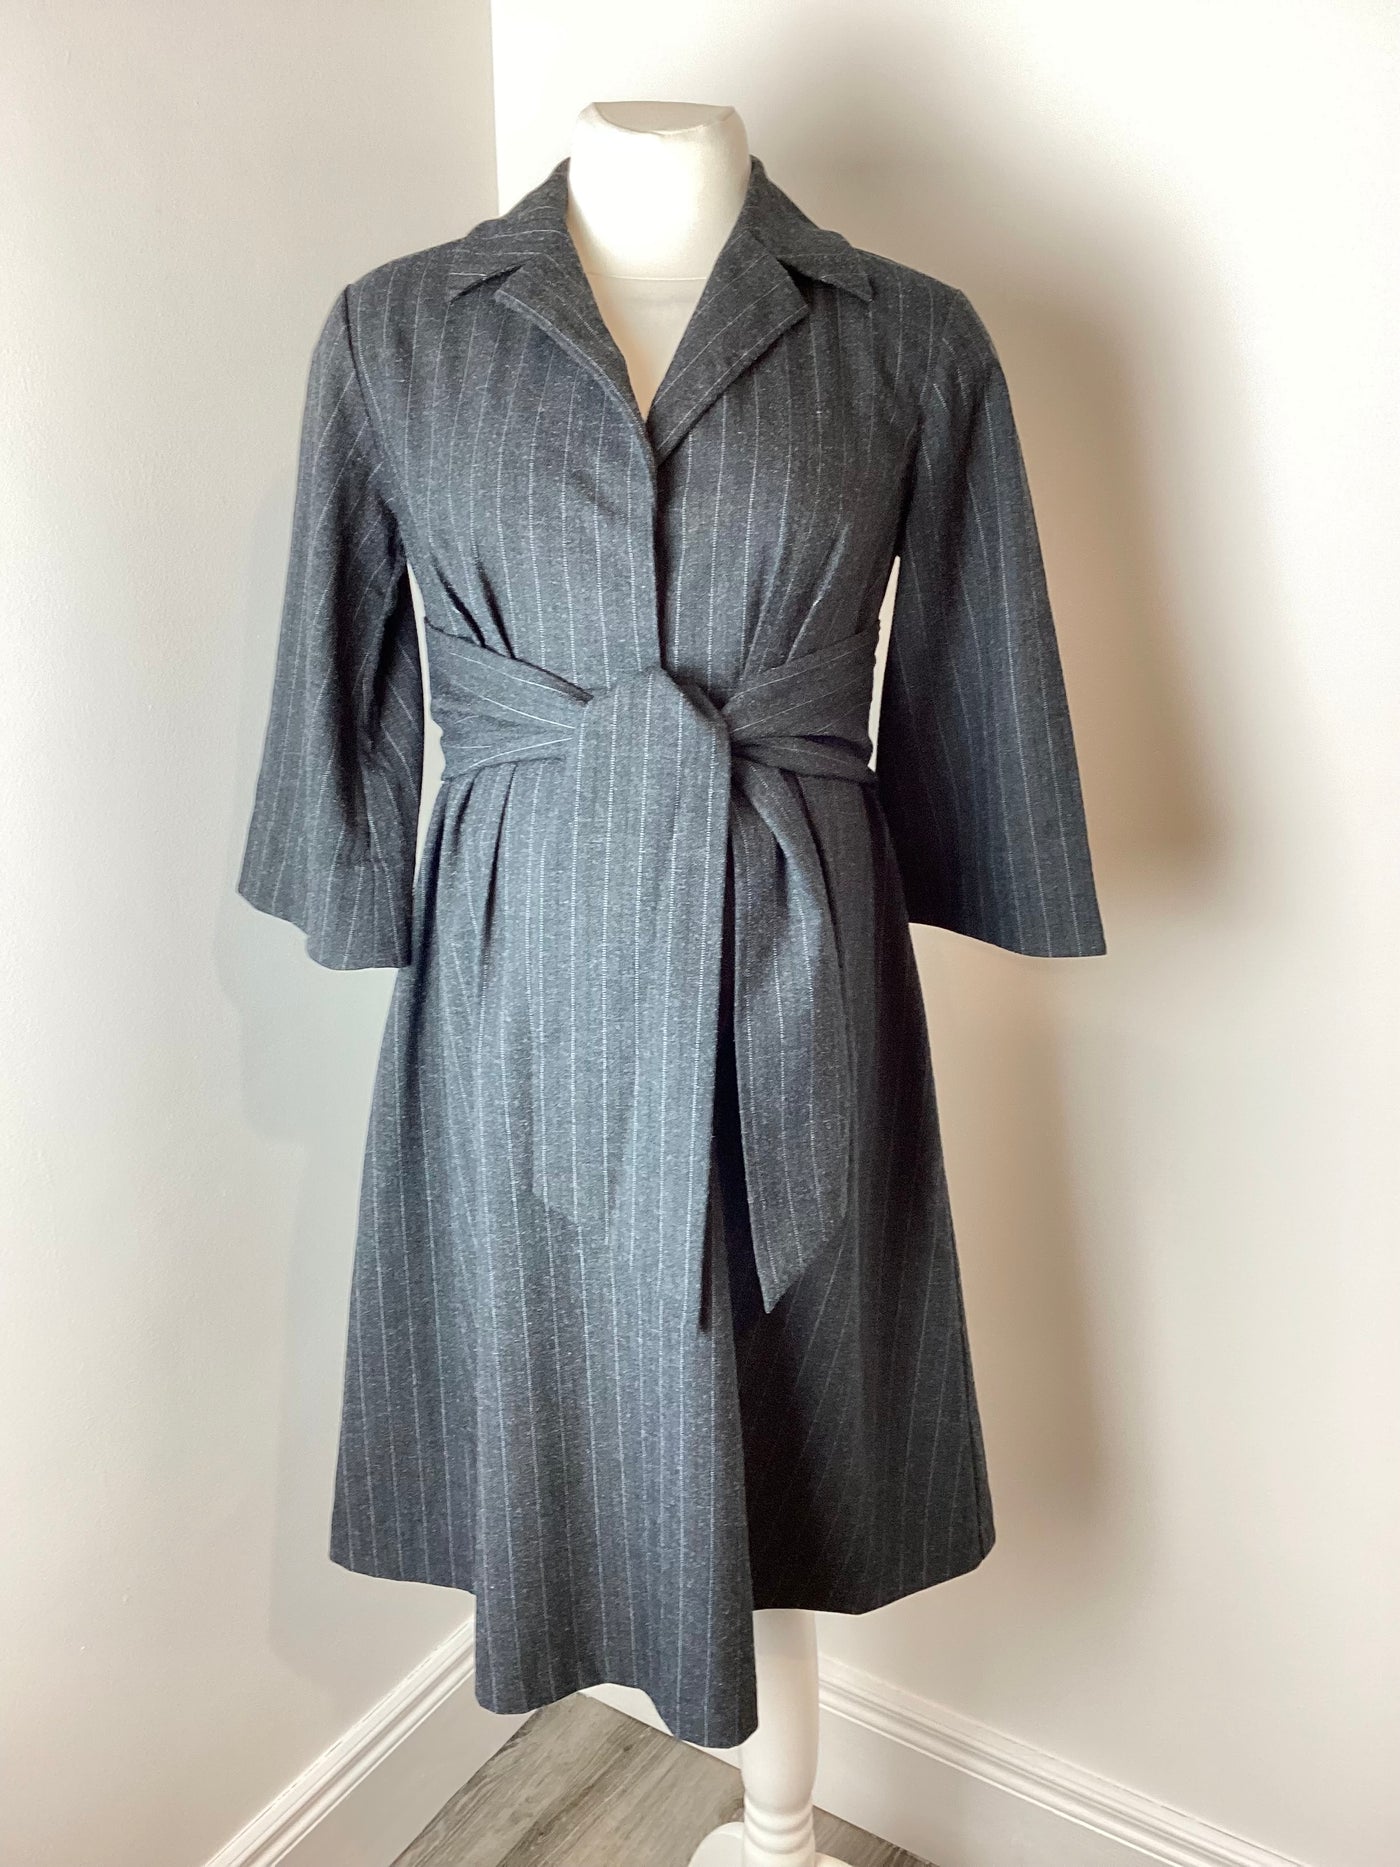 Isabella Oliver grey pinstripe dress with bell sleeves and waist tie - Size 1 (approx UK 8)